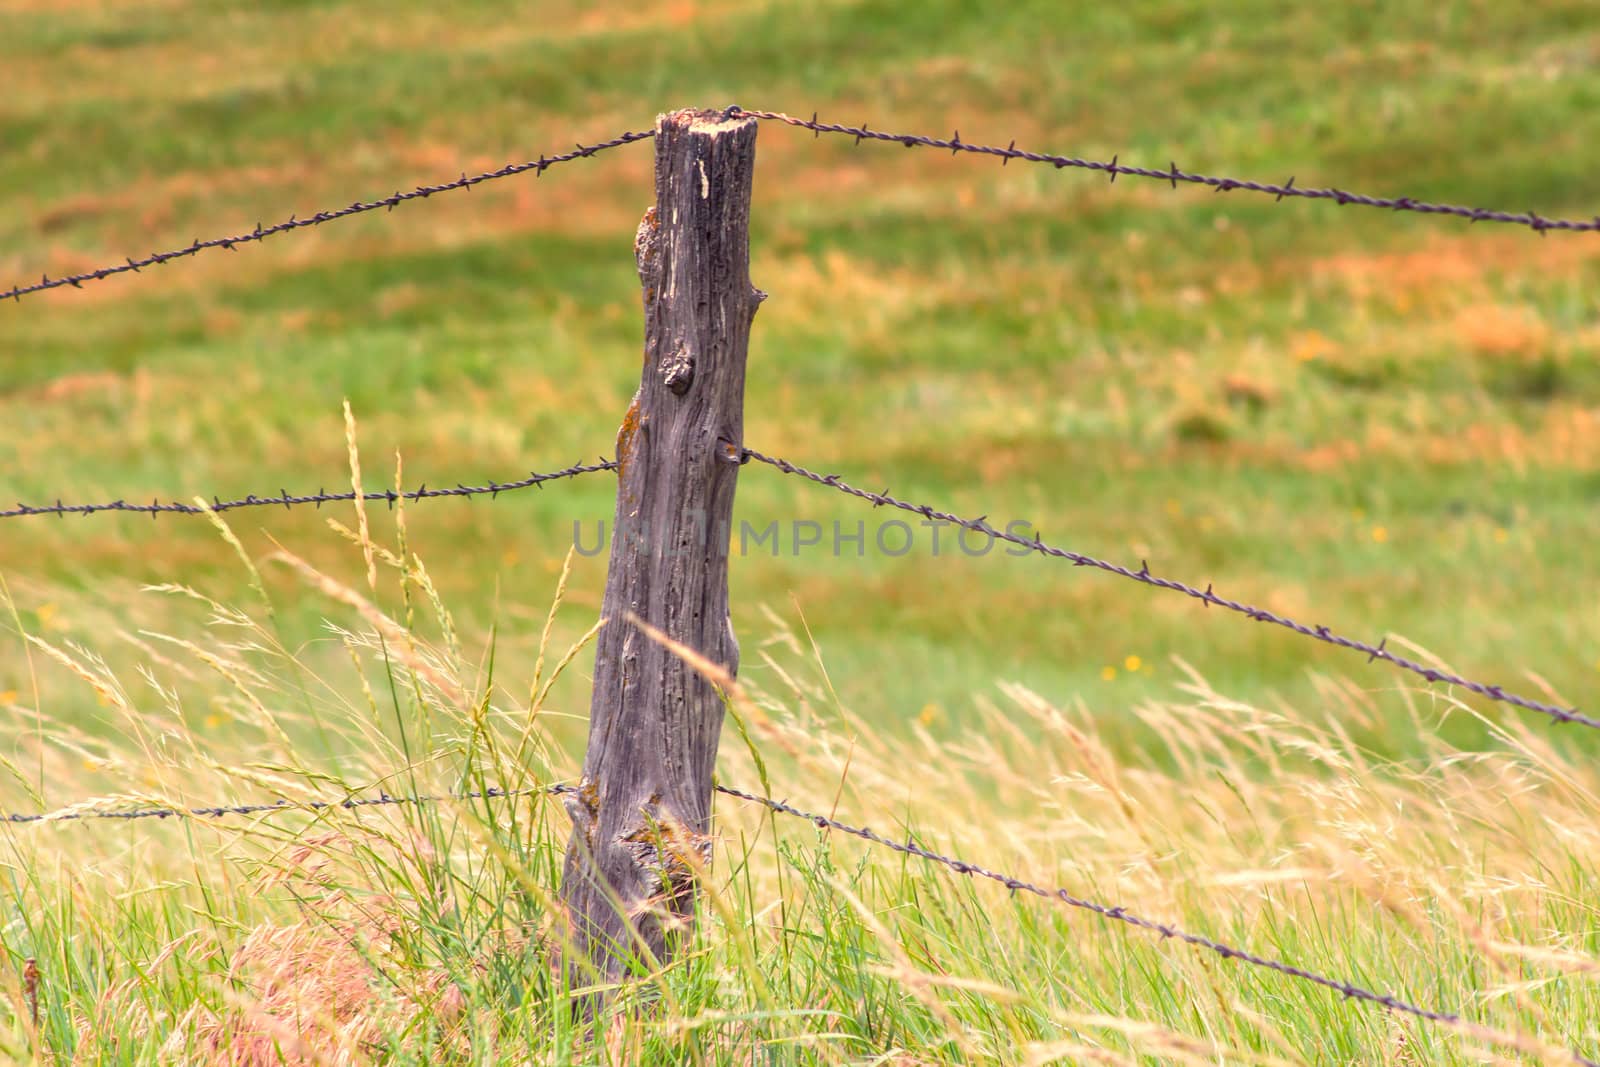 Barb Wire Fence at Buffalo Gap National Grassland by wolterk